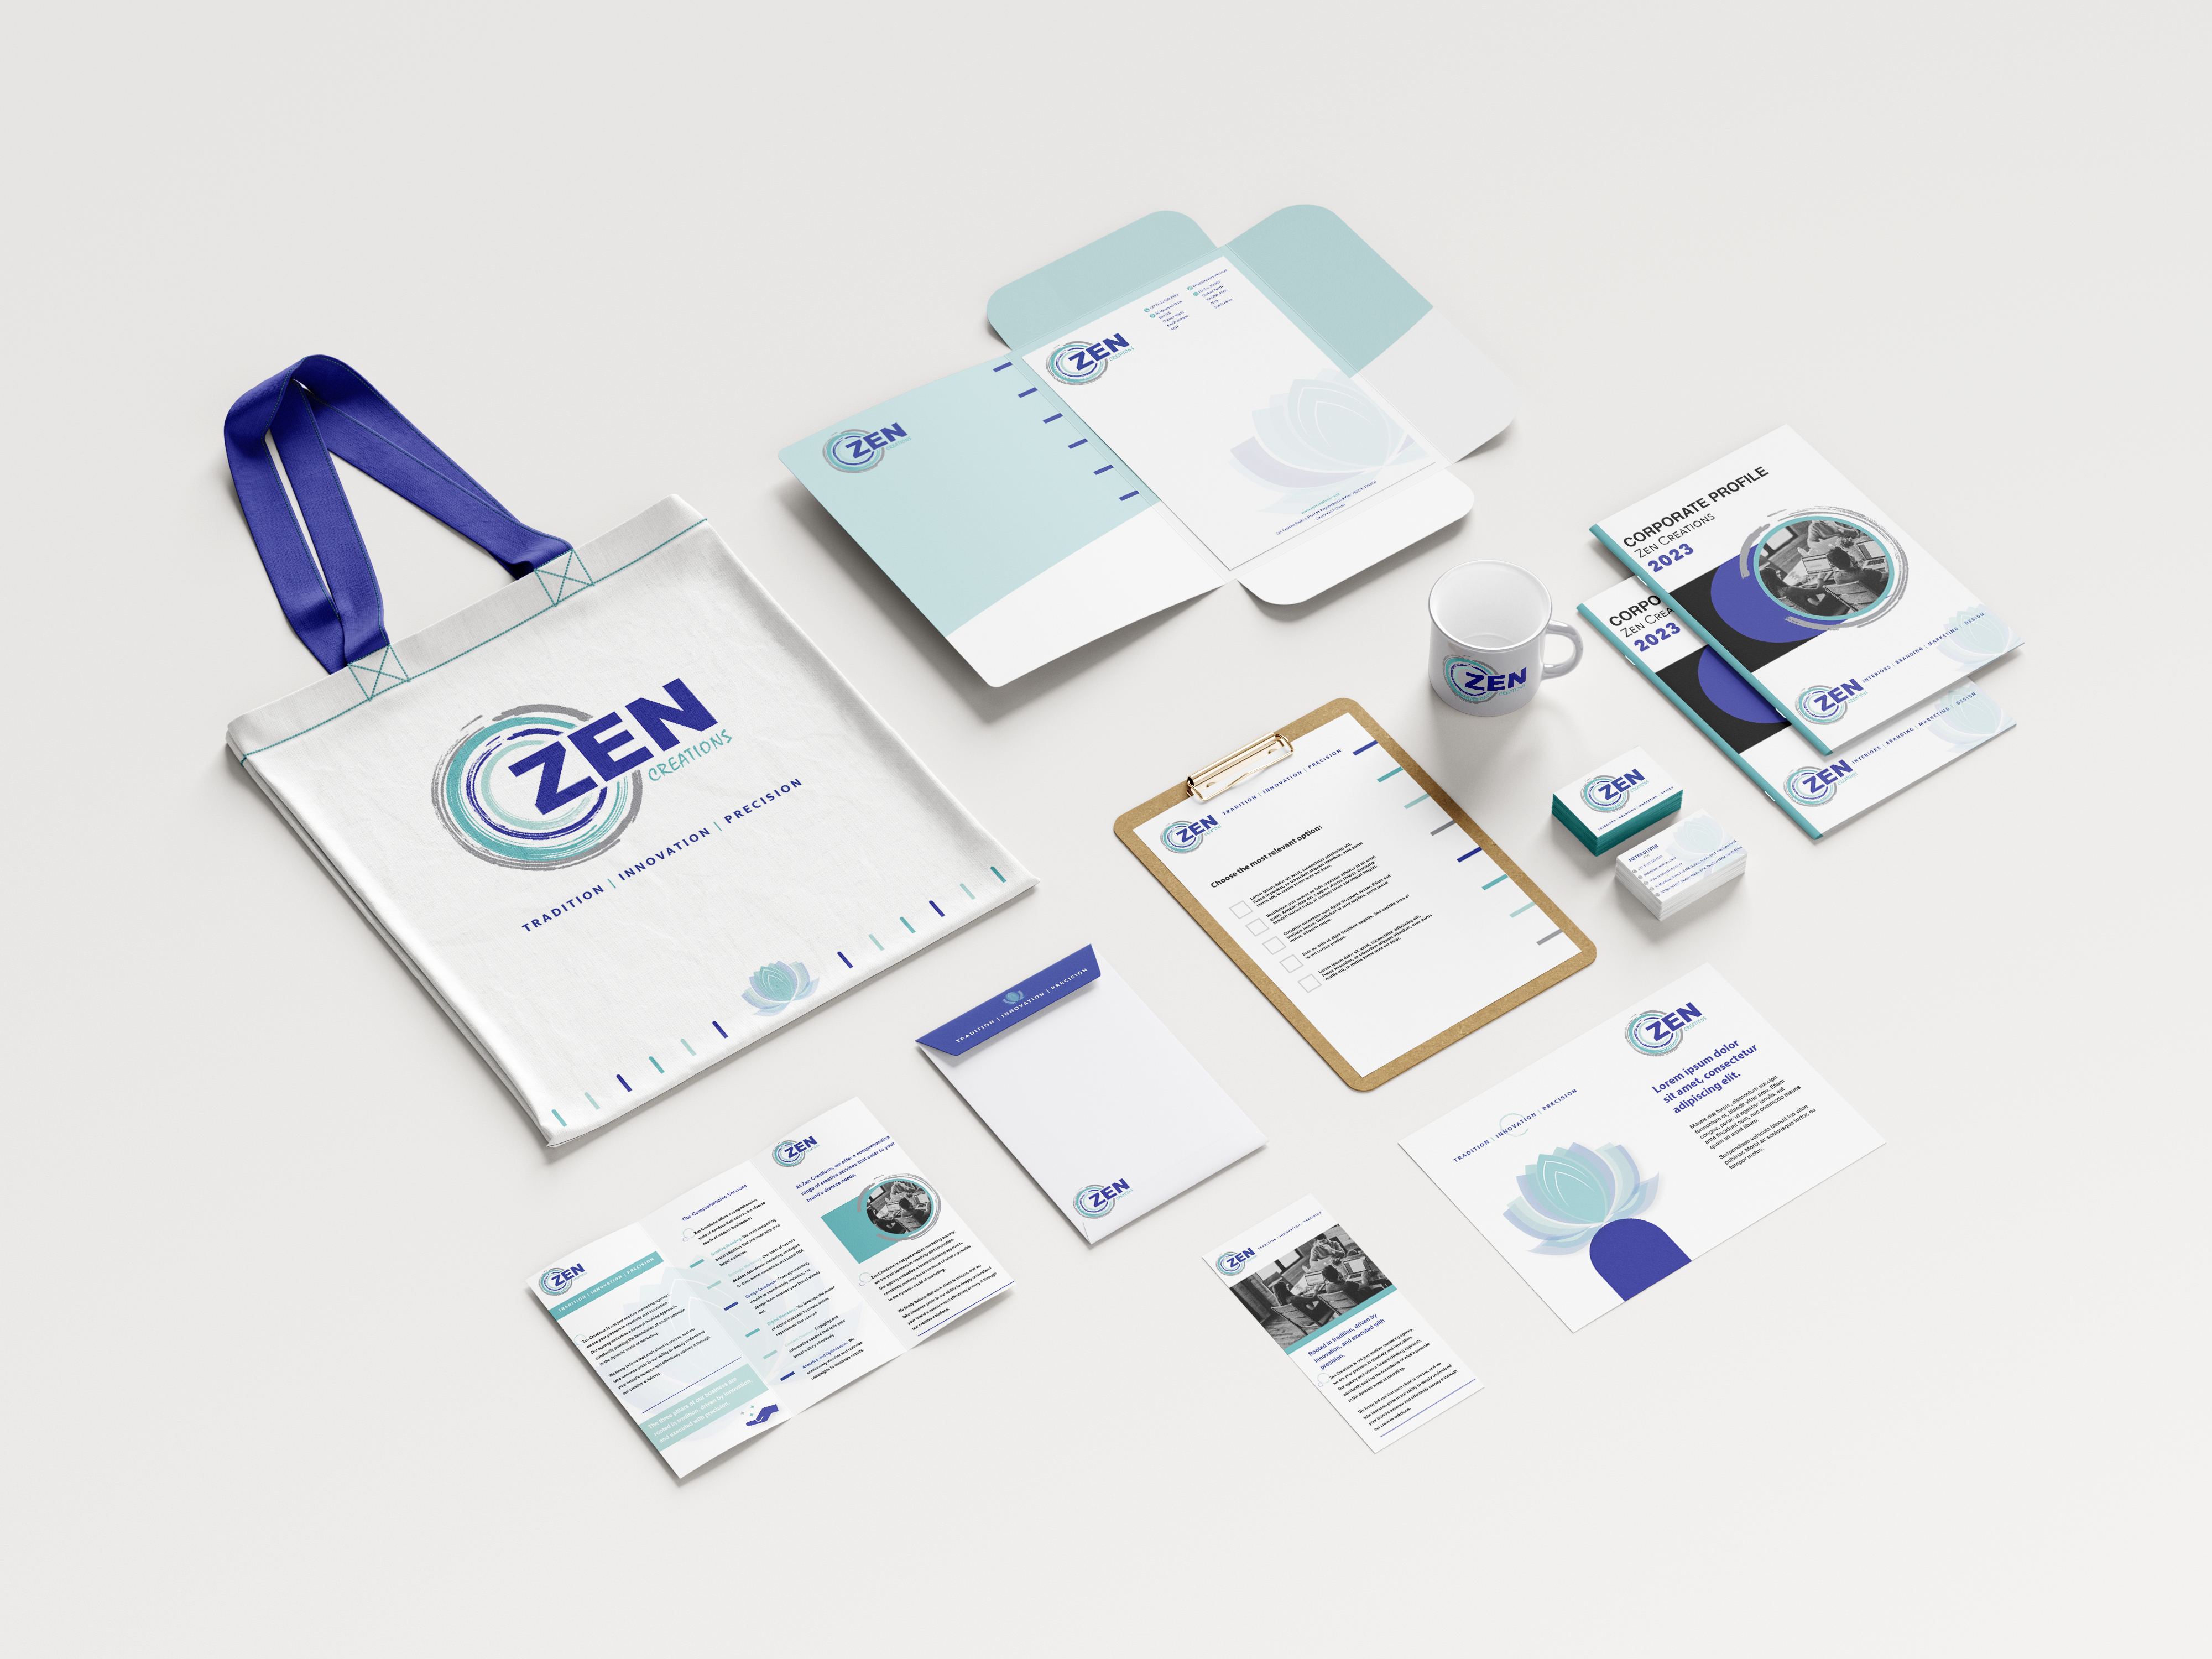 Zen Creations: Elevating Brands with Creative Excellence. We offer branding, design, marketing, and interior services. Contact us and start your creative journey today.